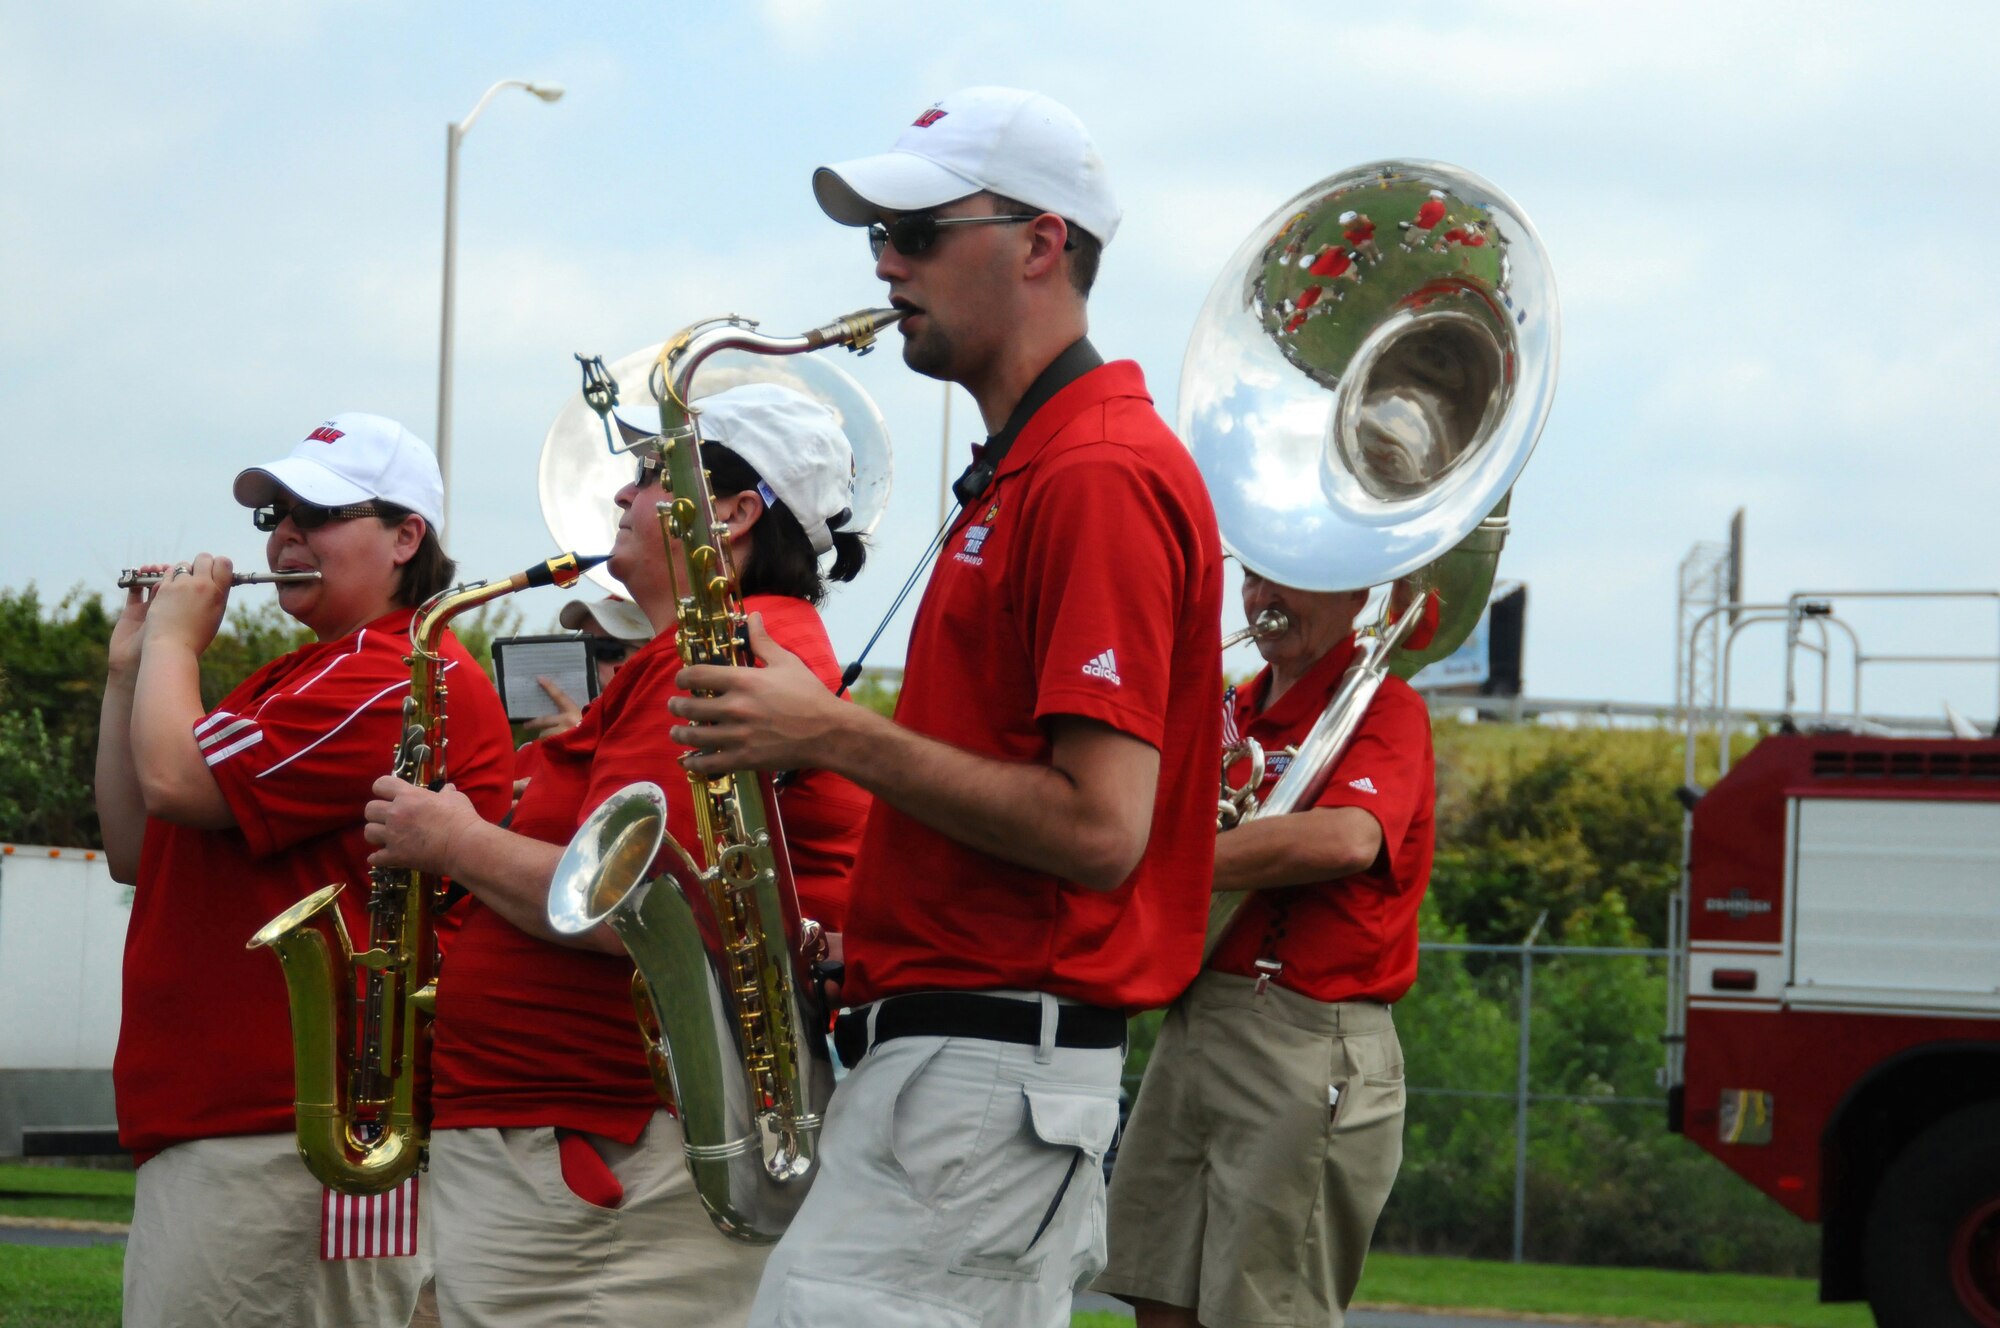 Members of the University of Louisville Marching Band perform for military families and friends at the Kentucky Air National Guard 123rd Airlift Wing “Family Day” event July 17, 2010. Guests were treated to barbecue, games, entertainment, rides and opportunities to learn about services available to members of the military community. (U.S. Air Force photo by Master Sgt. Phil Speck)